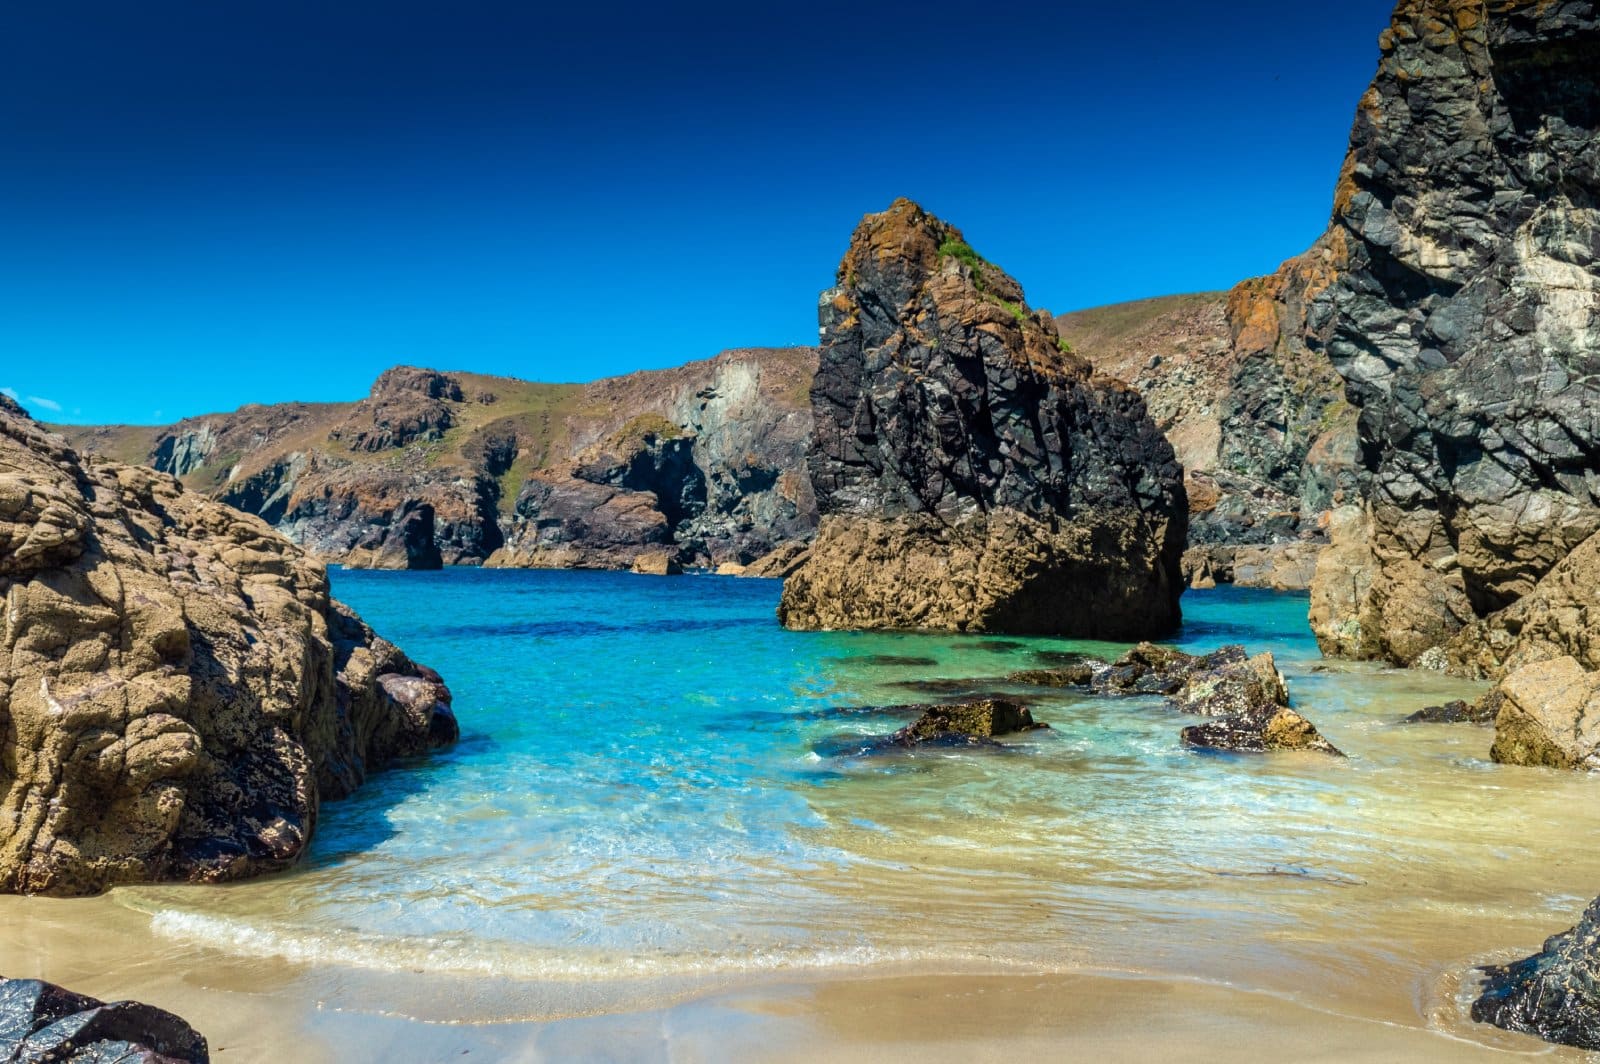 Image Credit: Shutterstock / Stefano Zaccaria <p>Kynance Cove’s turquoise waters and serpentine rock formations are Cornwall’s best-kept secret. Just be prepared for a bit of a hike down—and the reality that many others have discovered this ‘secret’ too.</p>